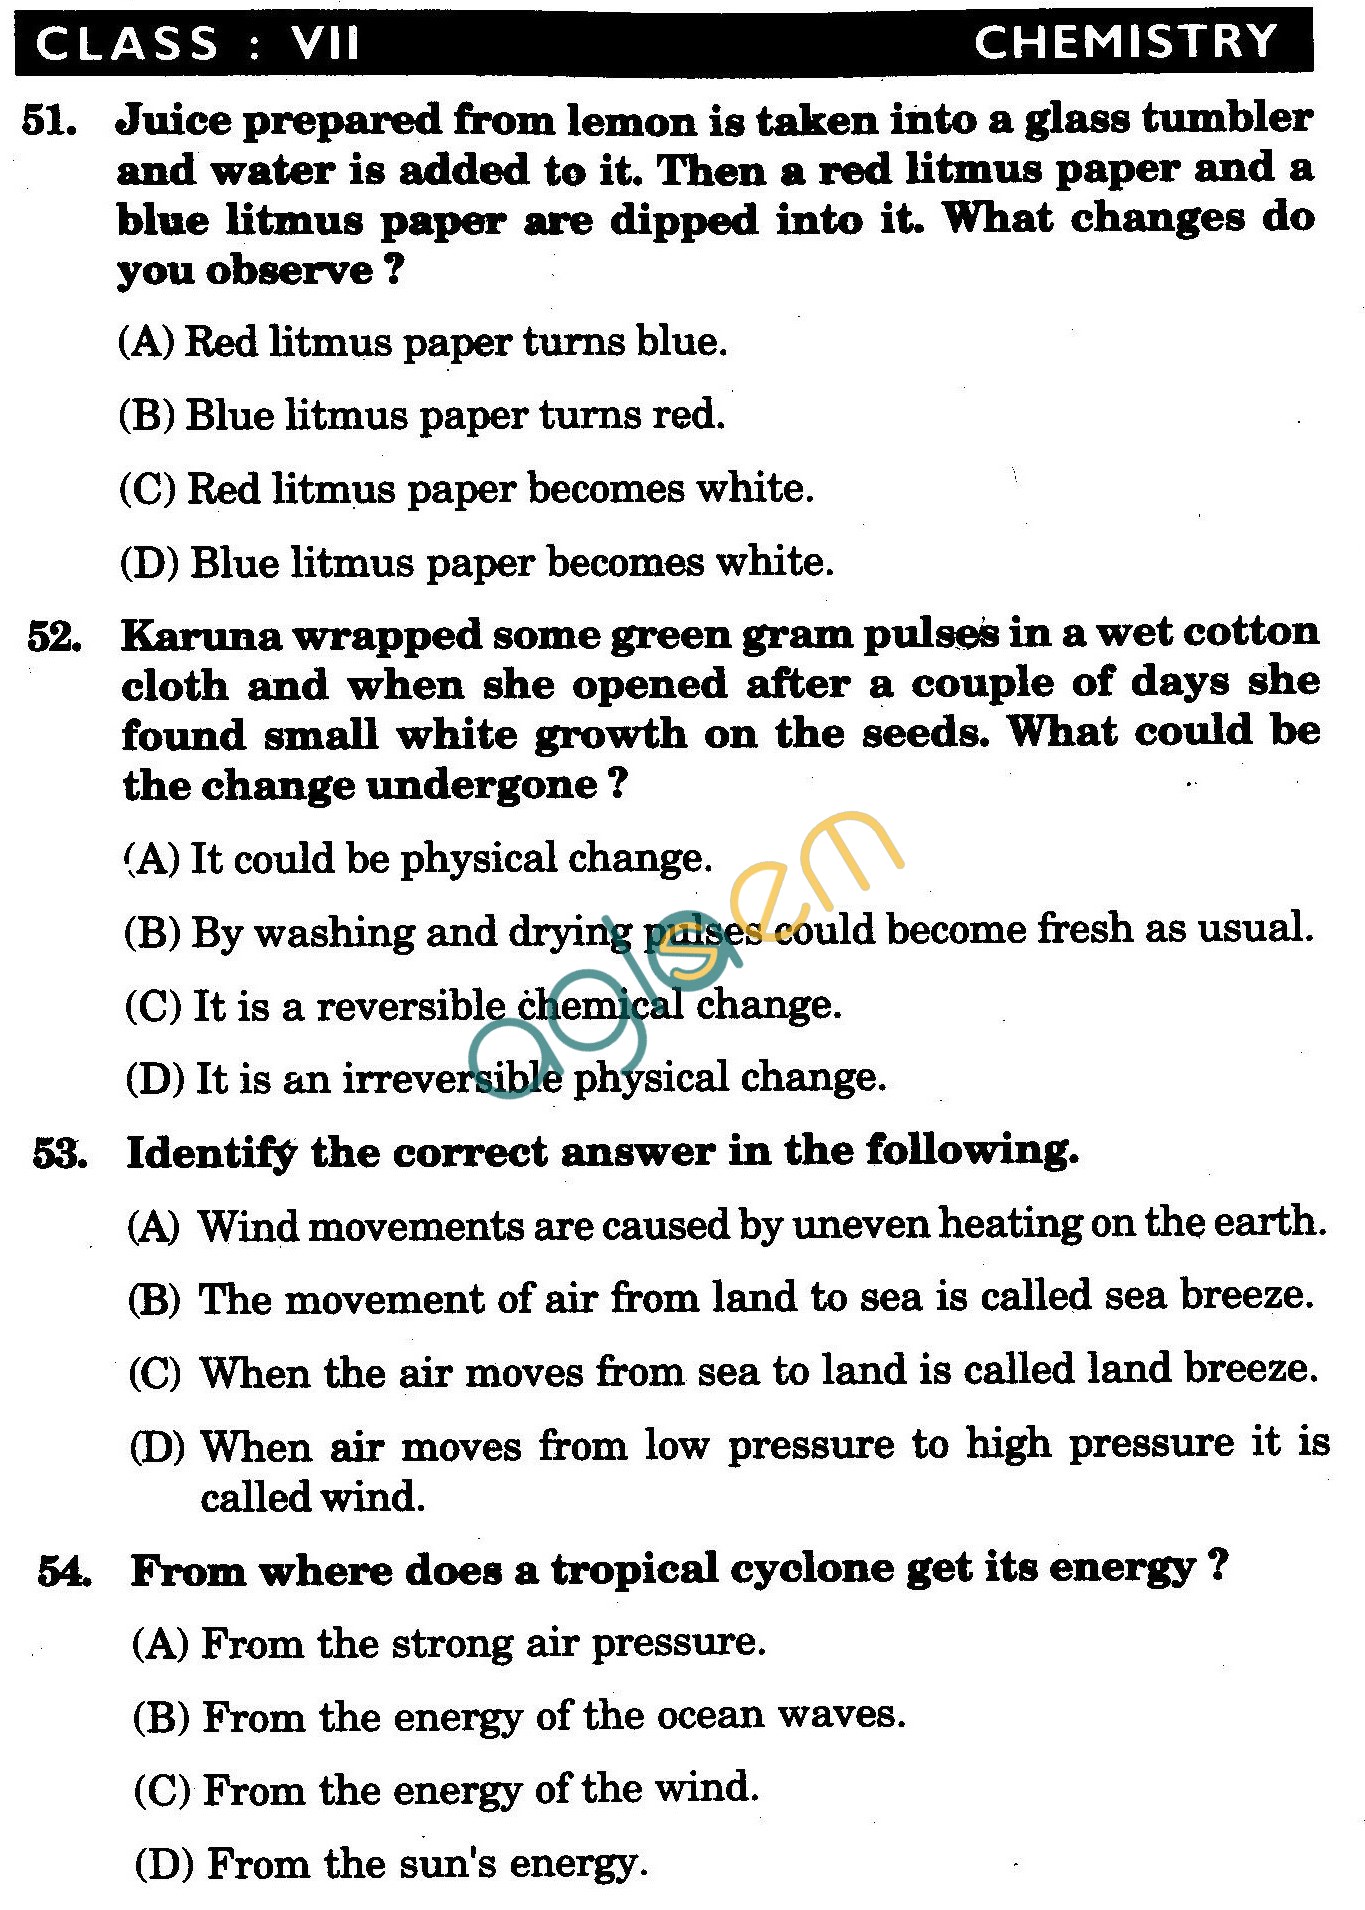 NSTSE 2010 Class VII Question Paper with Answers - Chemistry